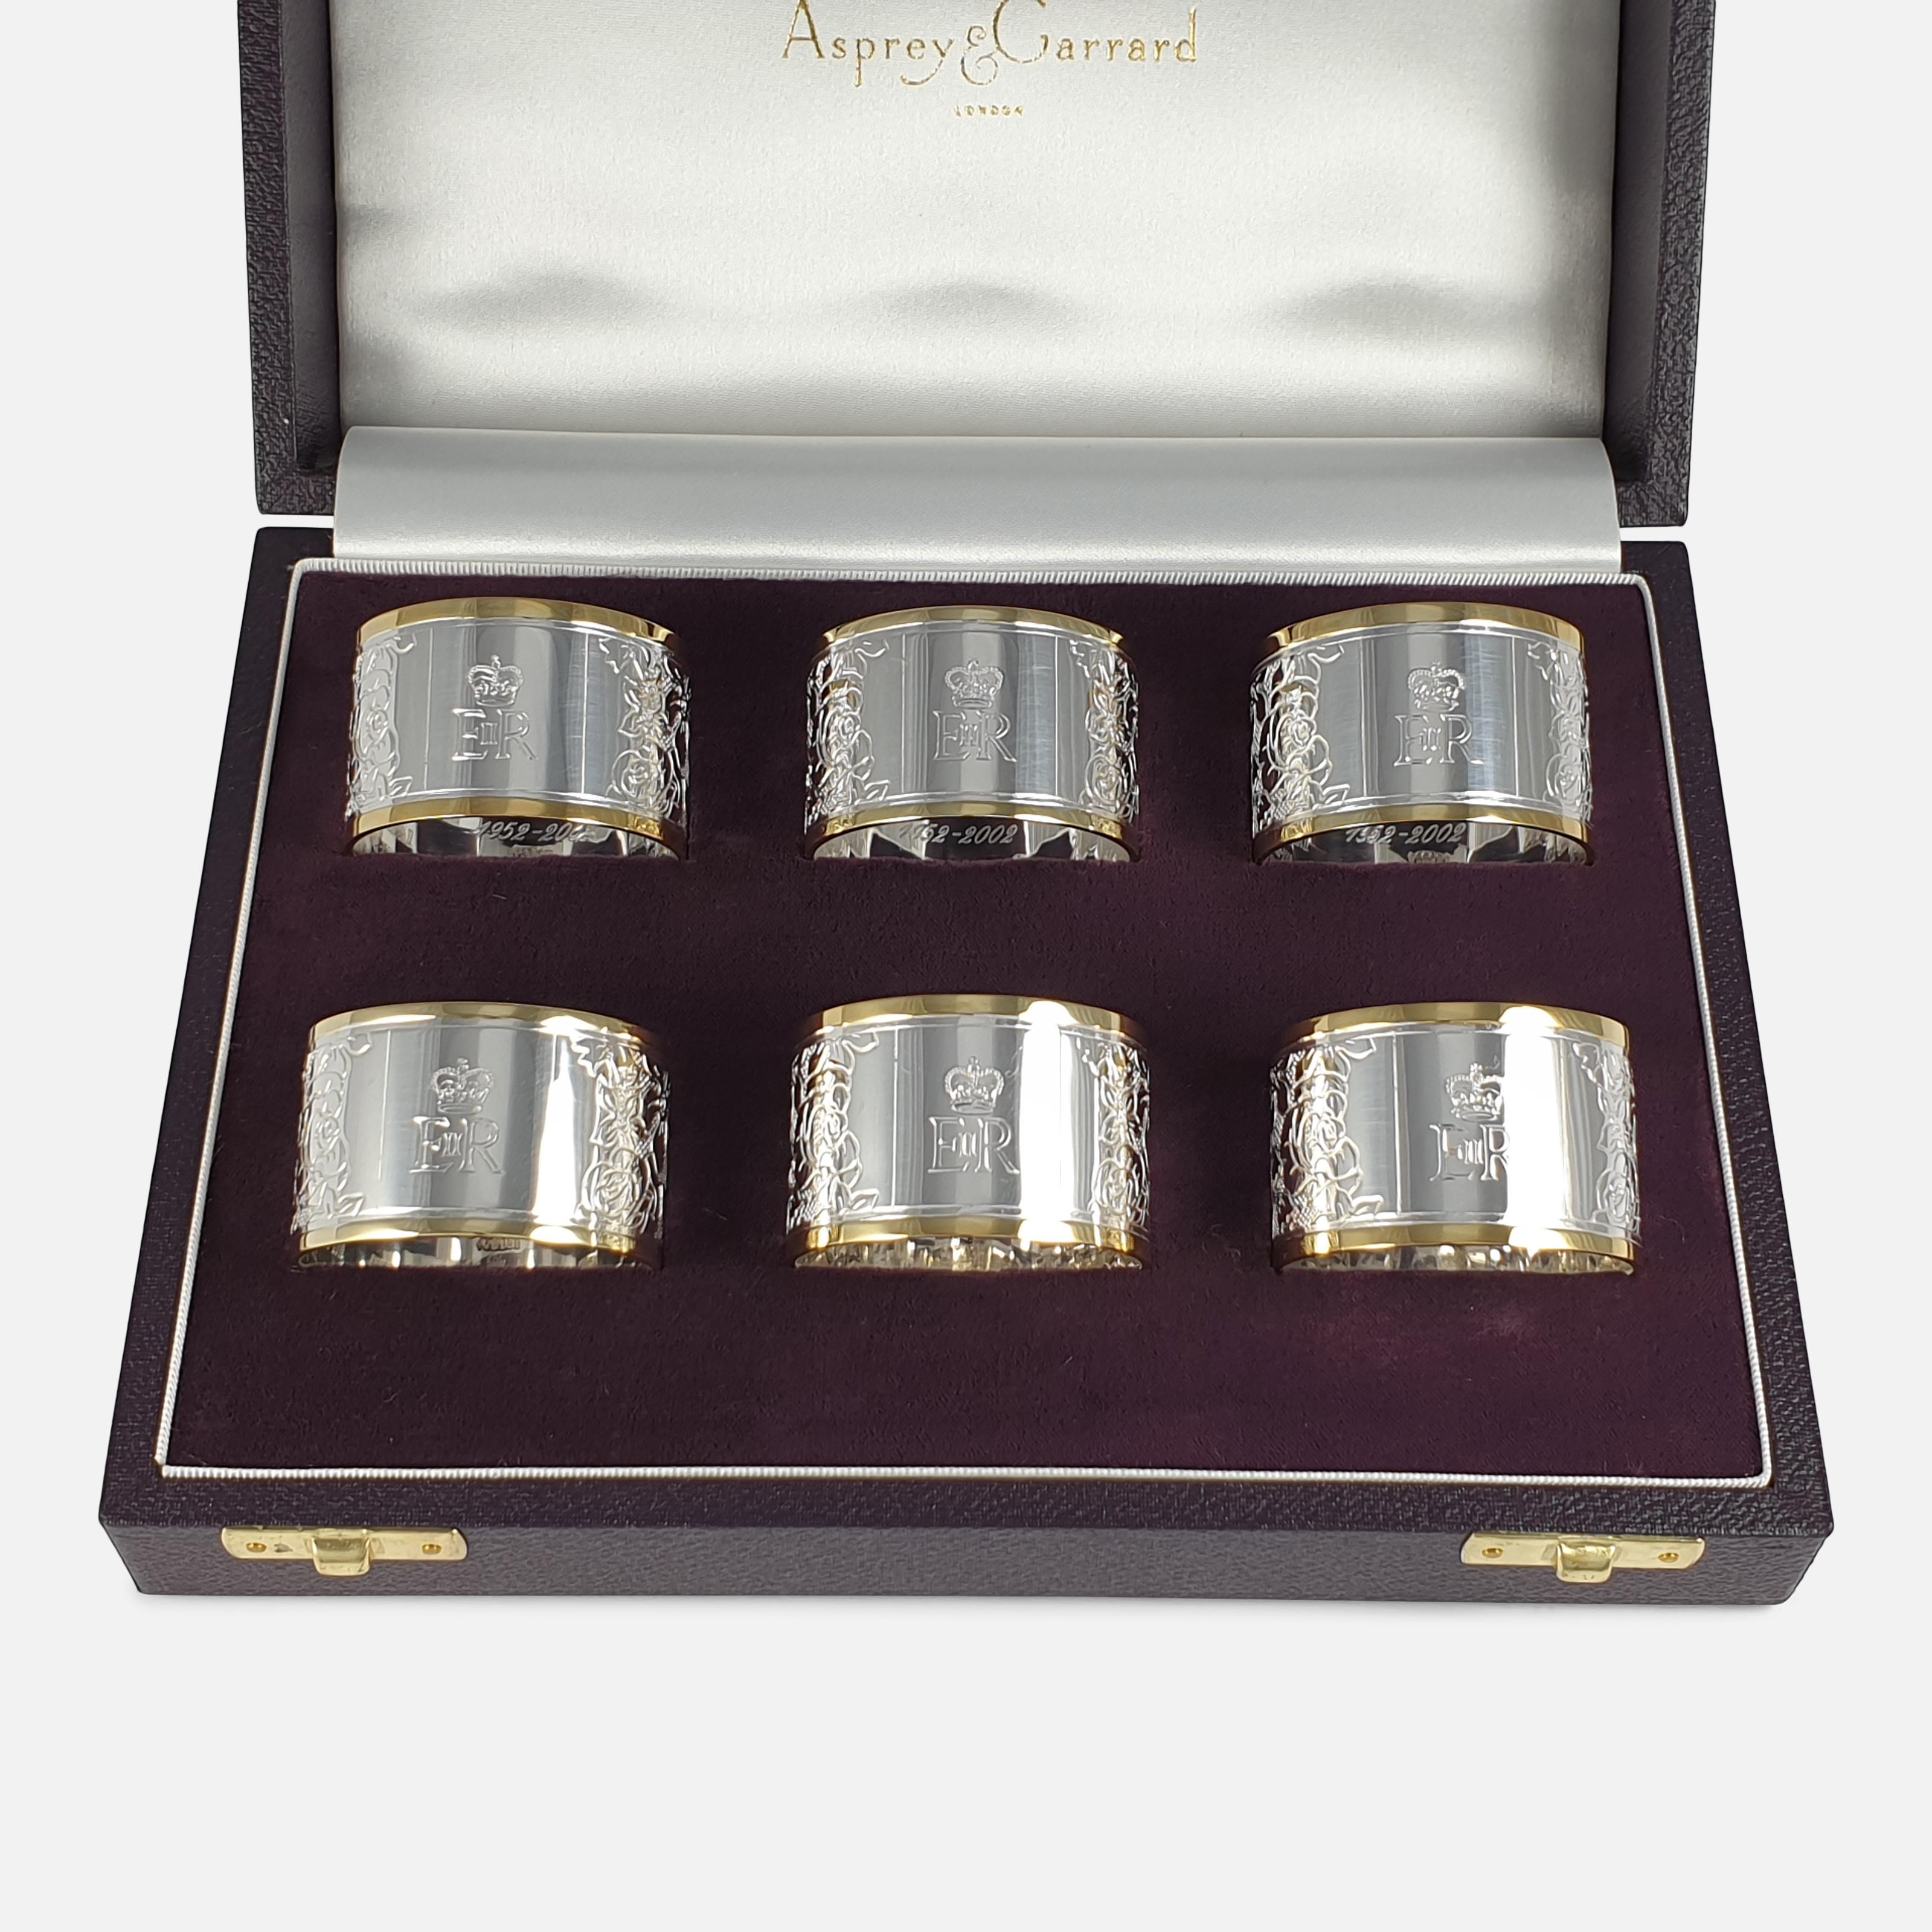 A cased set of six Elizabeth II parcel-gilt Britannia standard silver napkin rings, by Asprey & Co Ltd, London, 2002. The napkin rings are of typical round form, with a parcel-gilt rim; they are engraved with the Royal Cypher to the cartouche, and